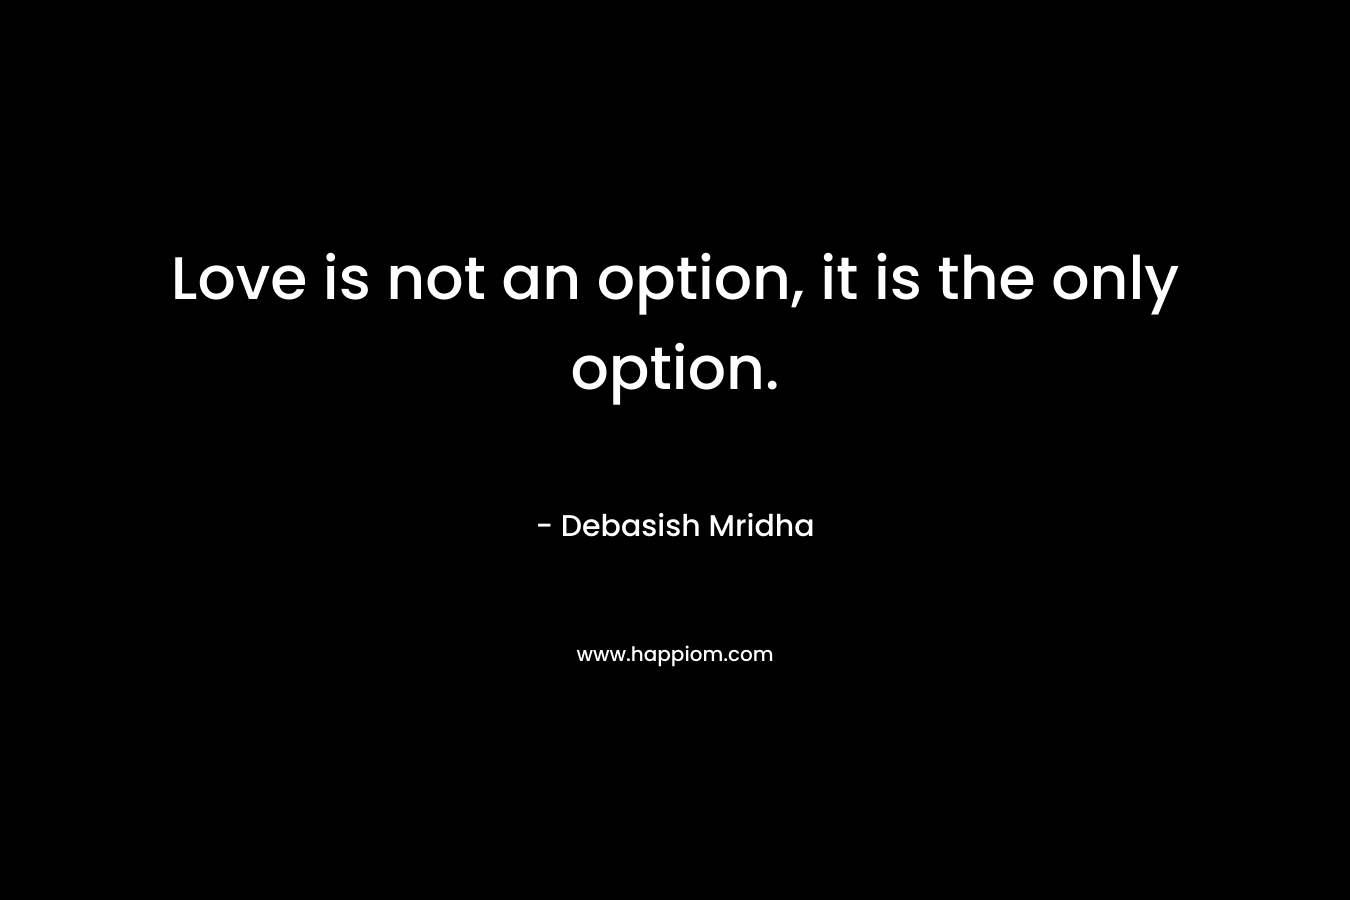 Love is not an option, it is the only option.